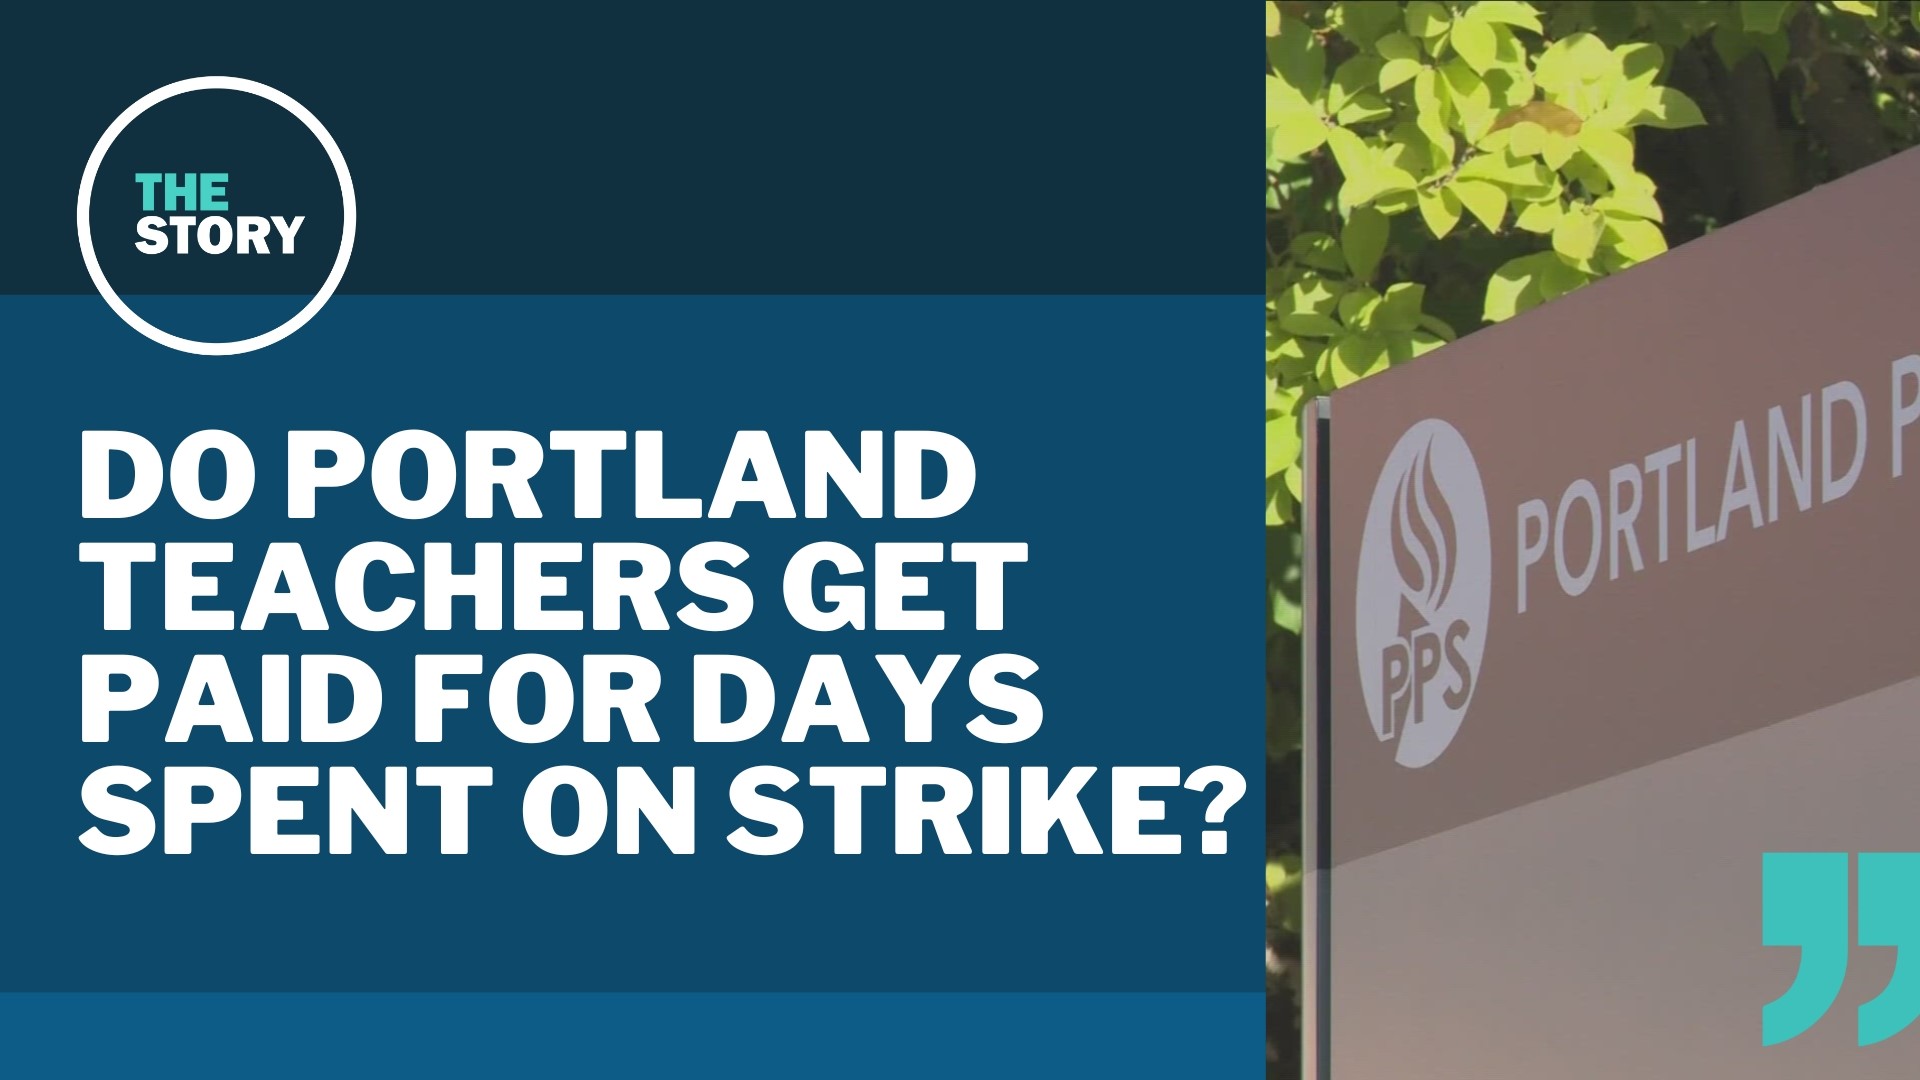 The district has said it won't pay teachers for strike days, although it also said backpay could become one of the elements of an eventual settlement.